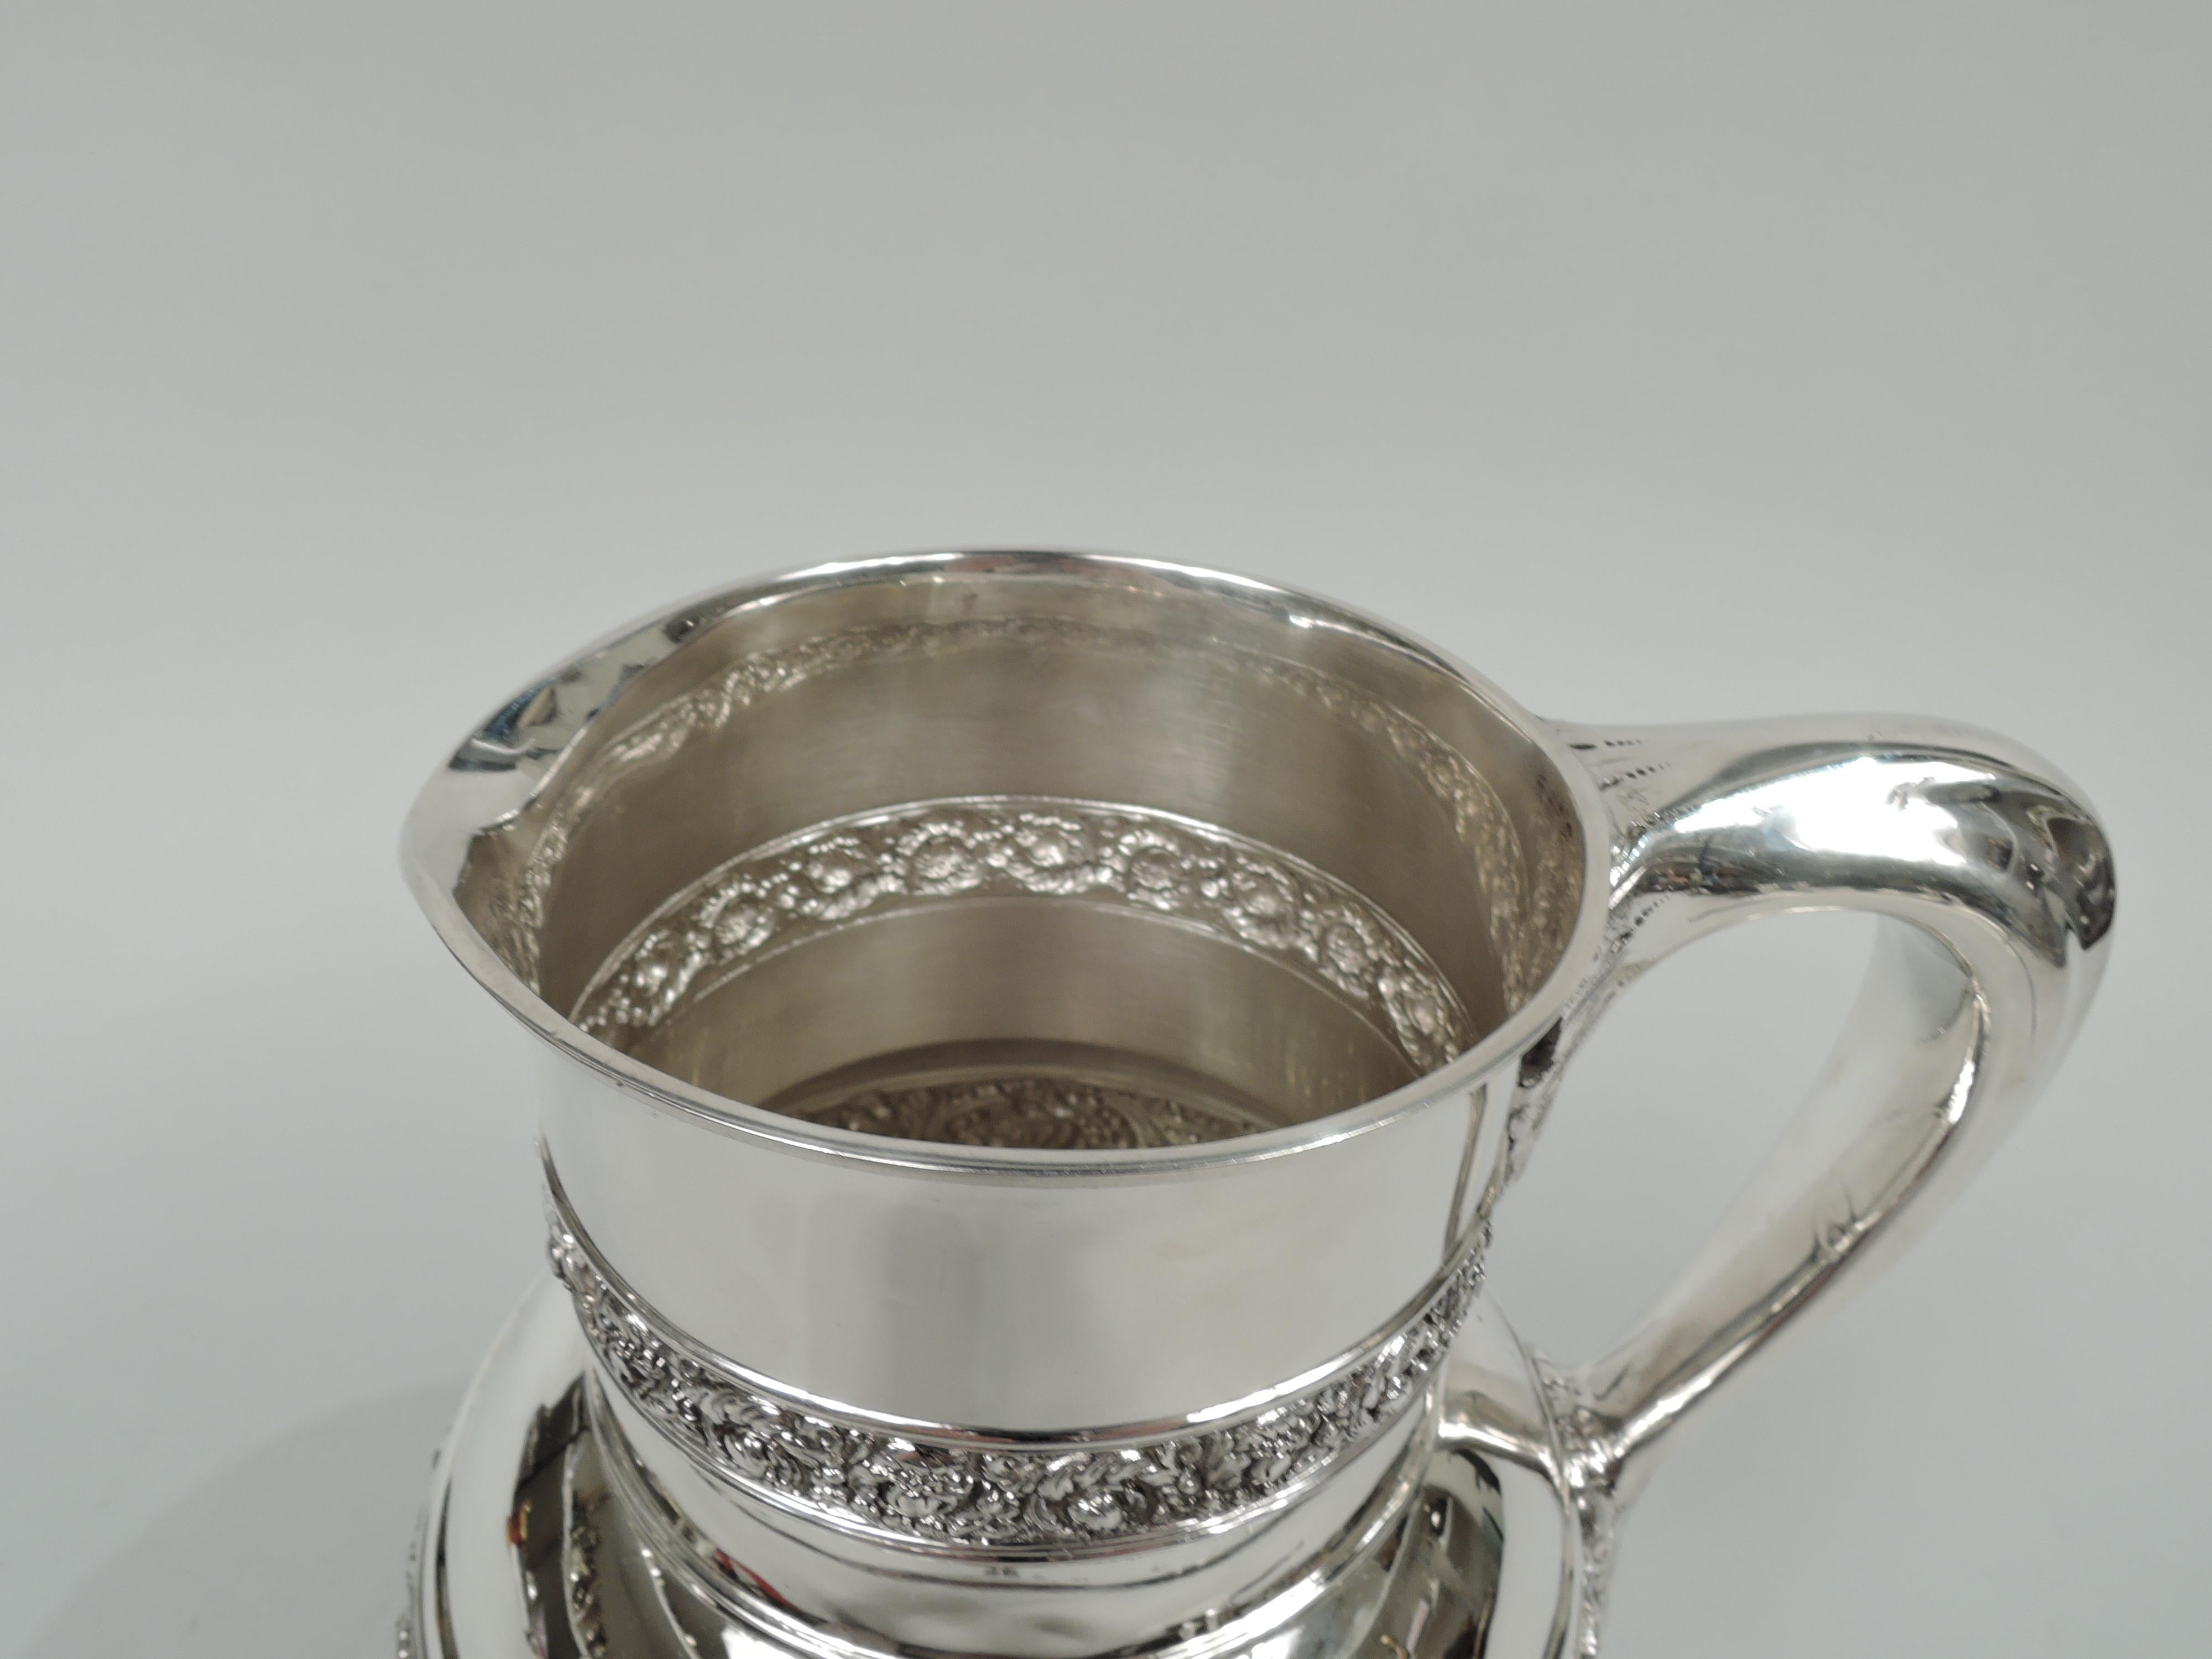 Olympian sterling silver water pitcher. Made by Tiffany & Co. in New York. Globular with drum-form neck, small lip spout, and leaf-mounted scroll bracket handle. Exterior encircled with chased and embossed frieze of love-making and harp-strumming